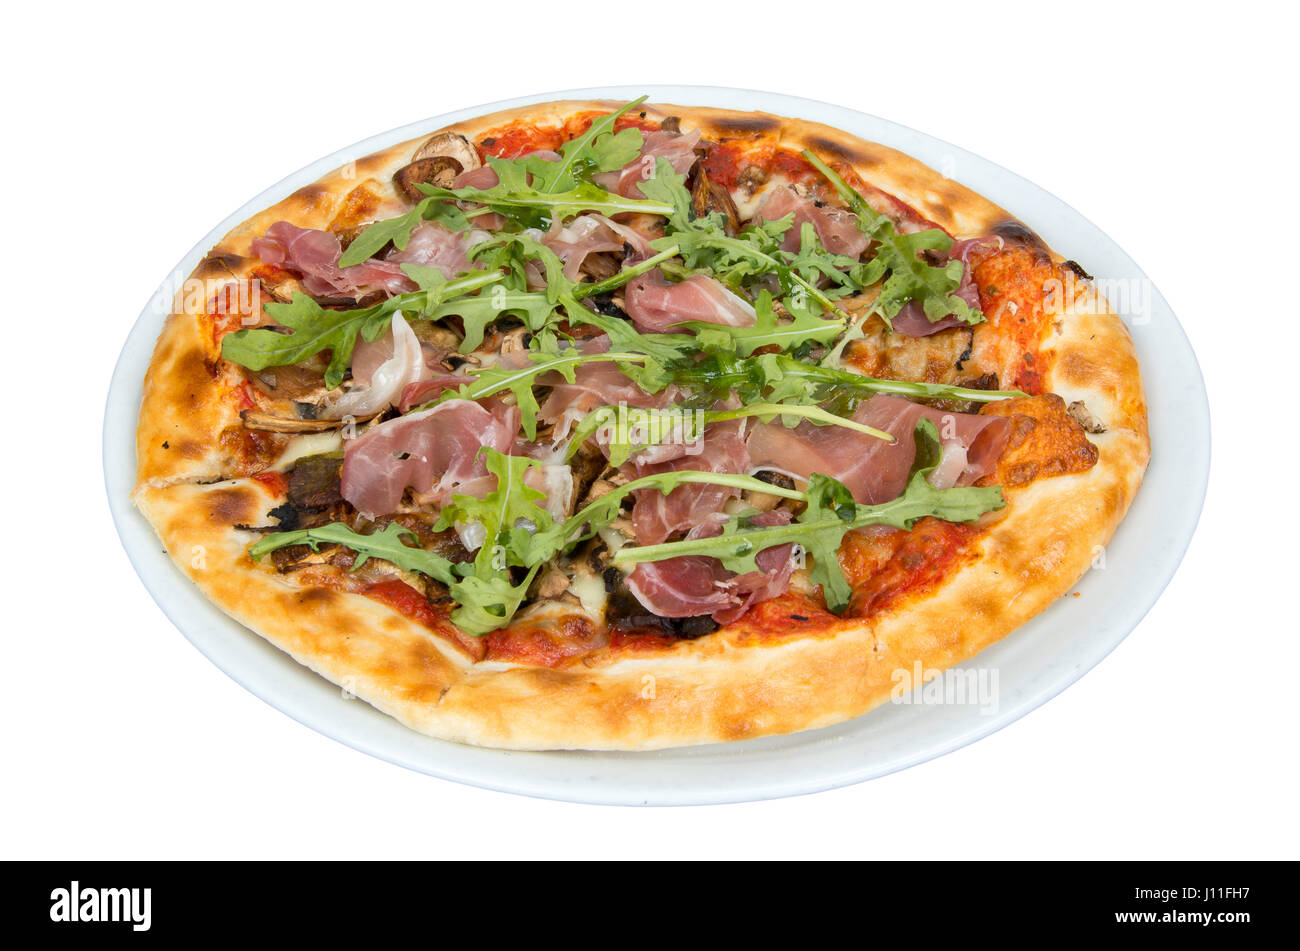 Pizza on a white background with tomato sauce, bacon and mushrooms. Stock Photo